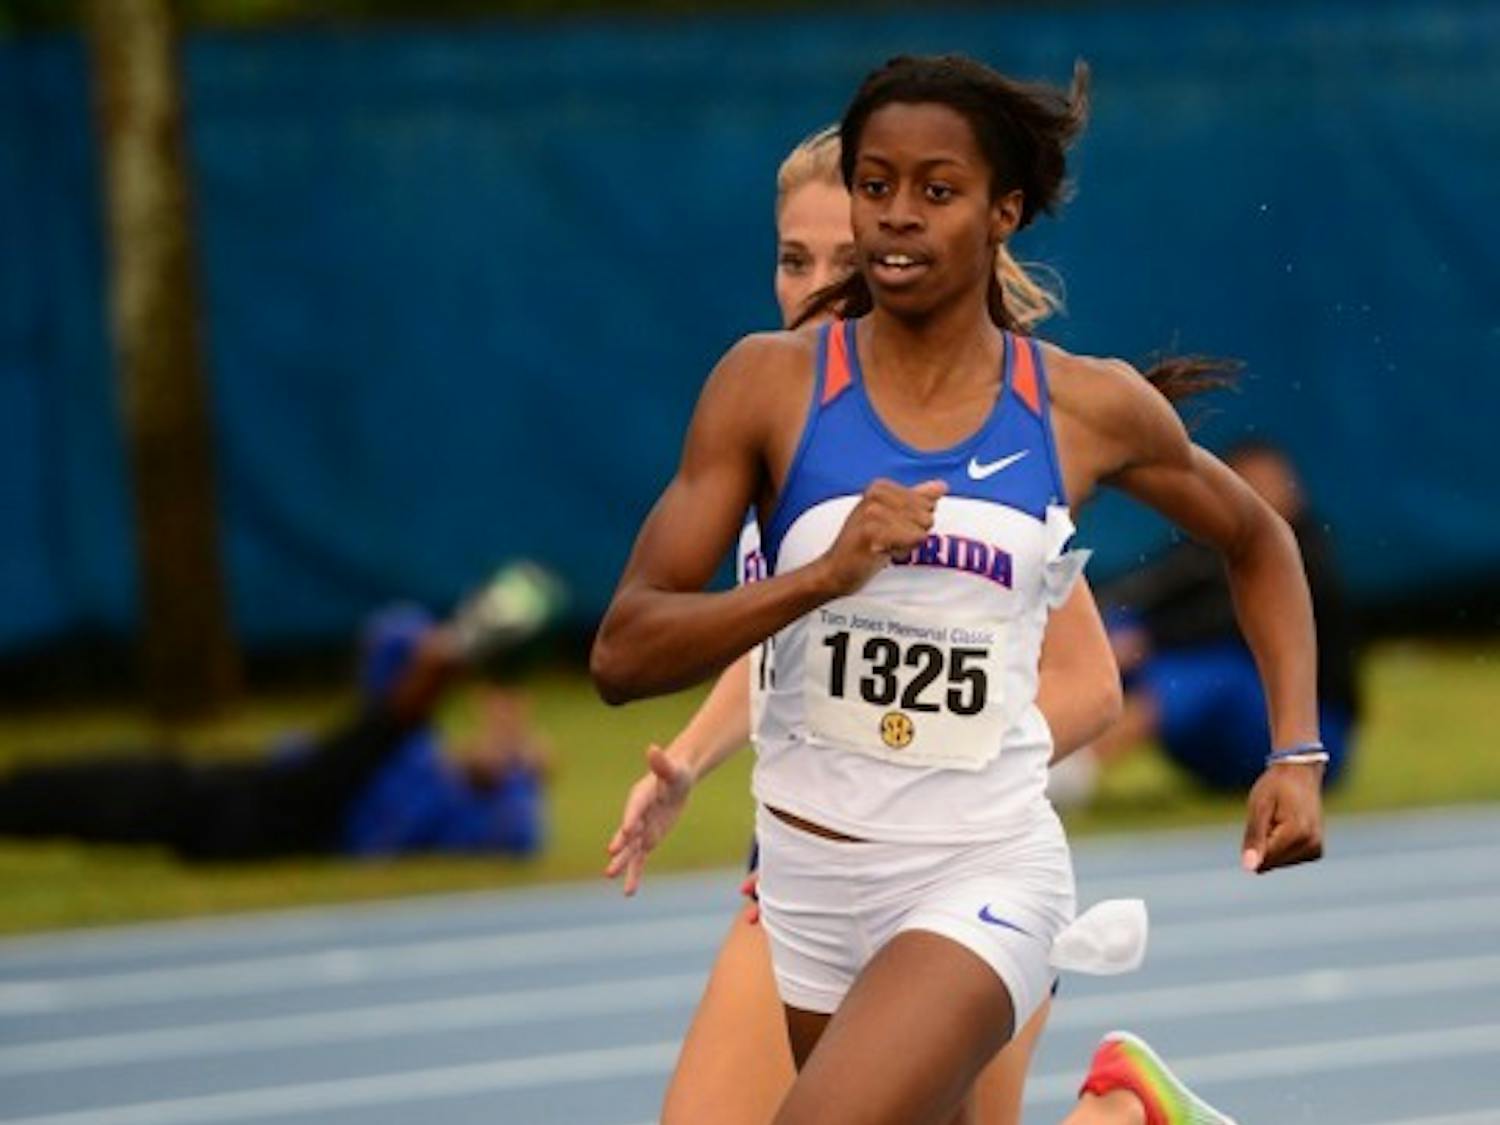 Lanie Whittaker runs at the Tom Jones Classic on April 21, 2012. Whittaker helped the Gators take first in the sprint medley relay at the Florida Relays on Saturday.